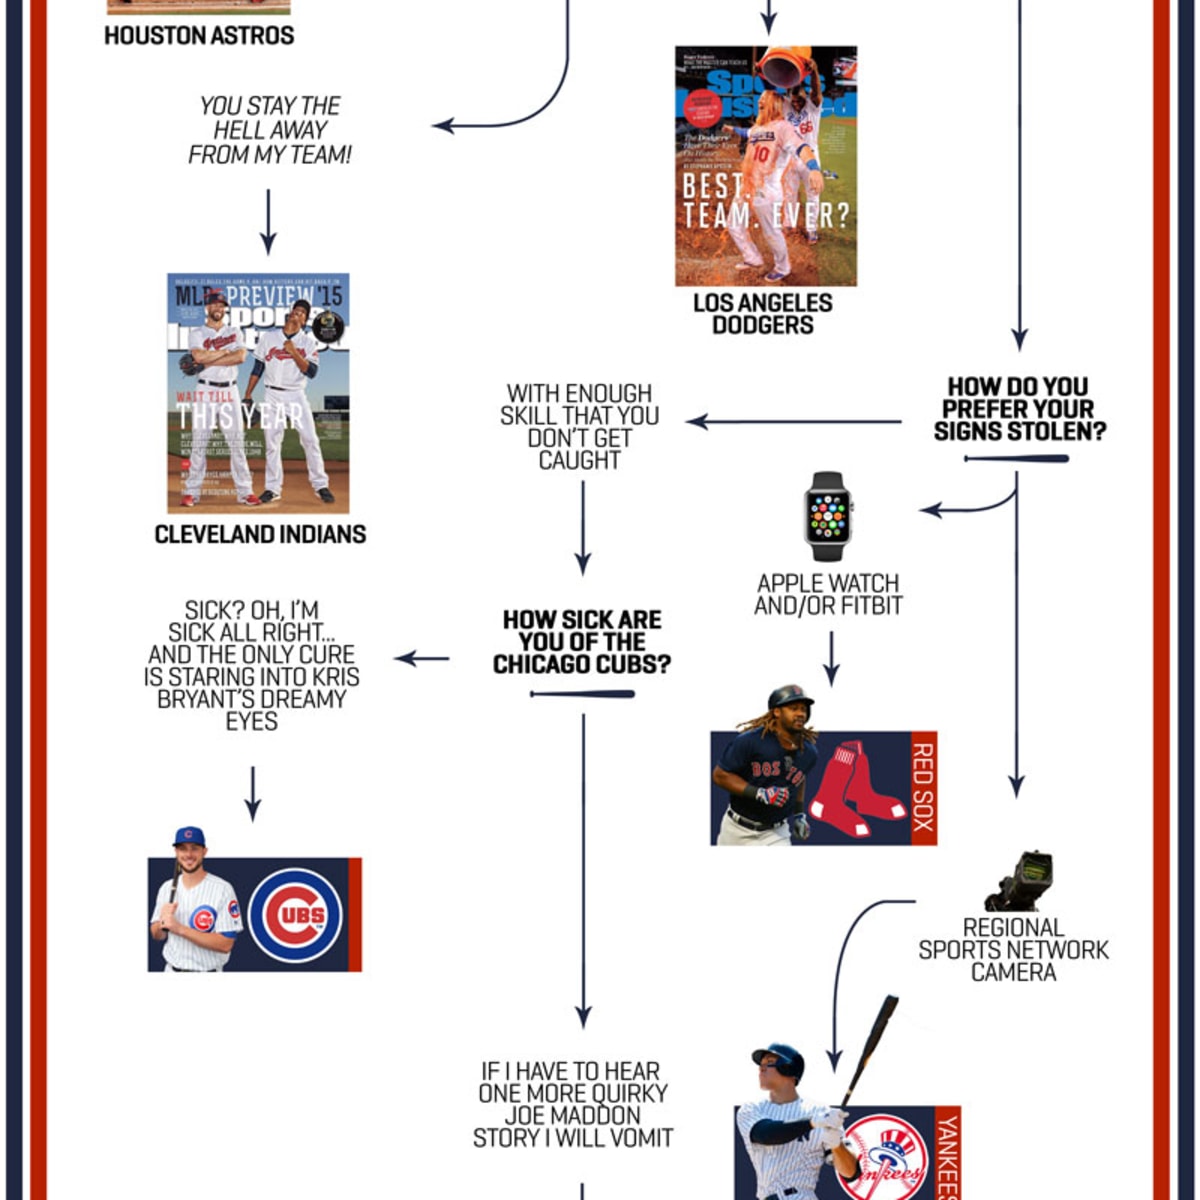 2017 MLB Playoff Flowchart: Who Should You Root For? - Sports